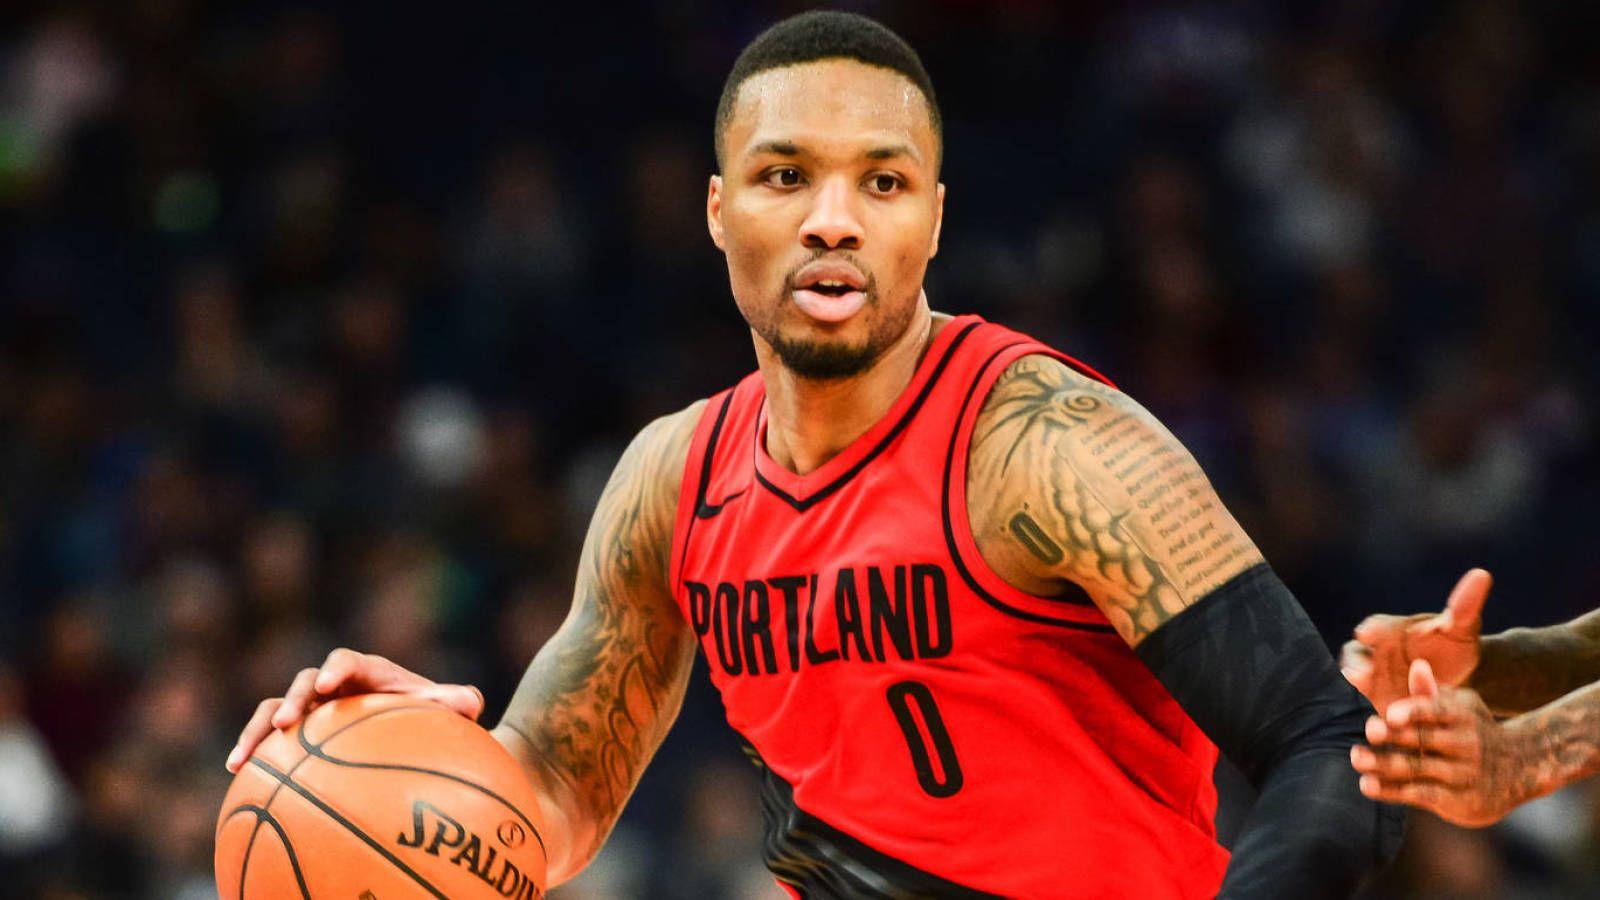 Damian Lillard reacts to being snubbed in ESPN graphic